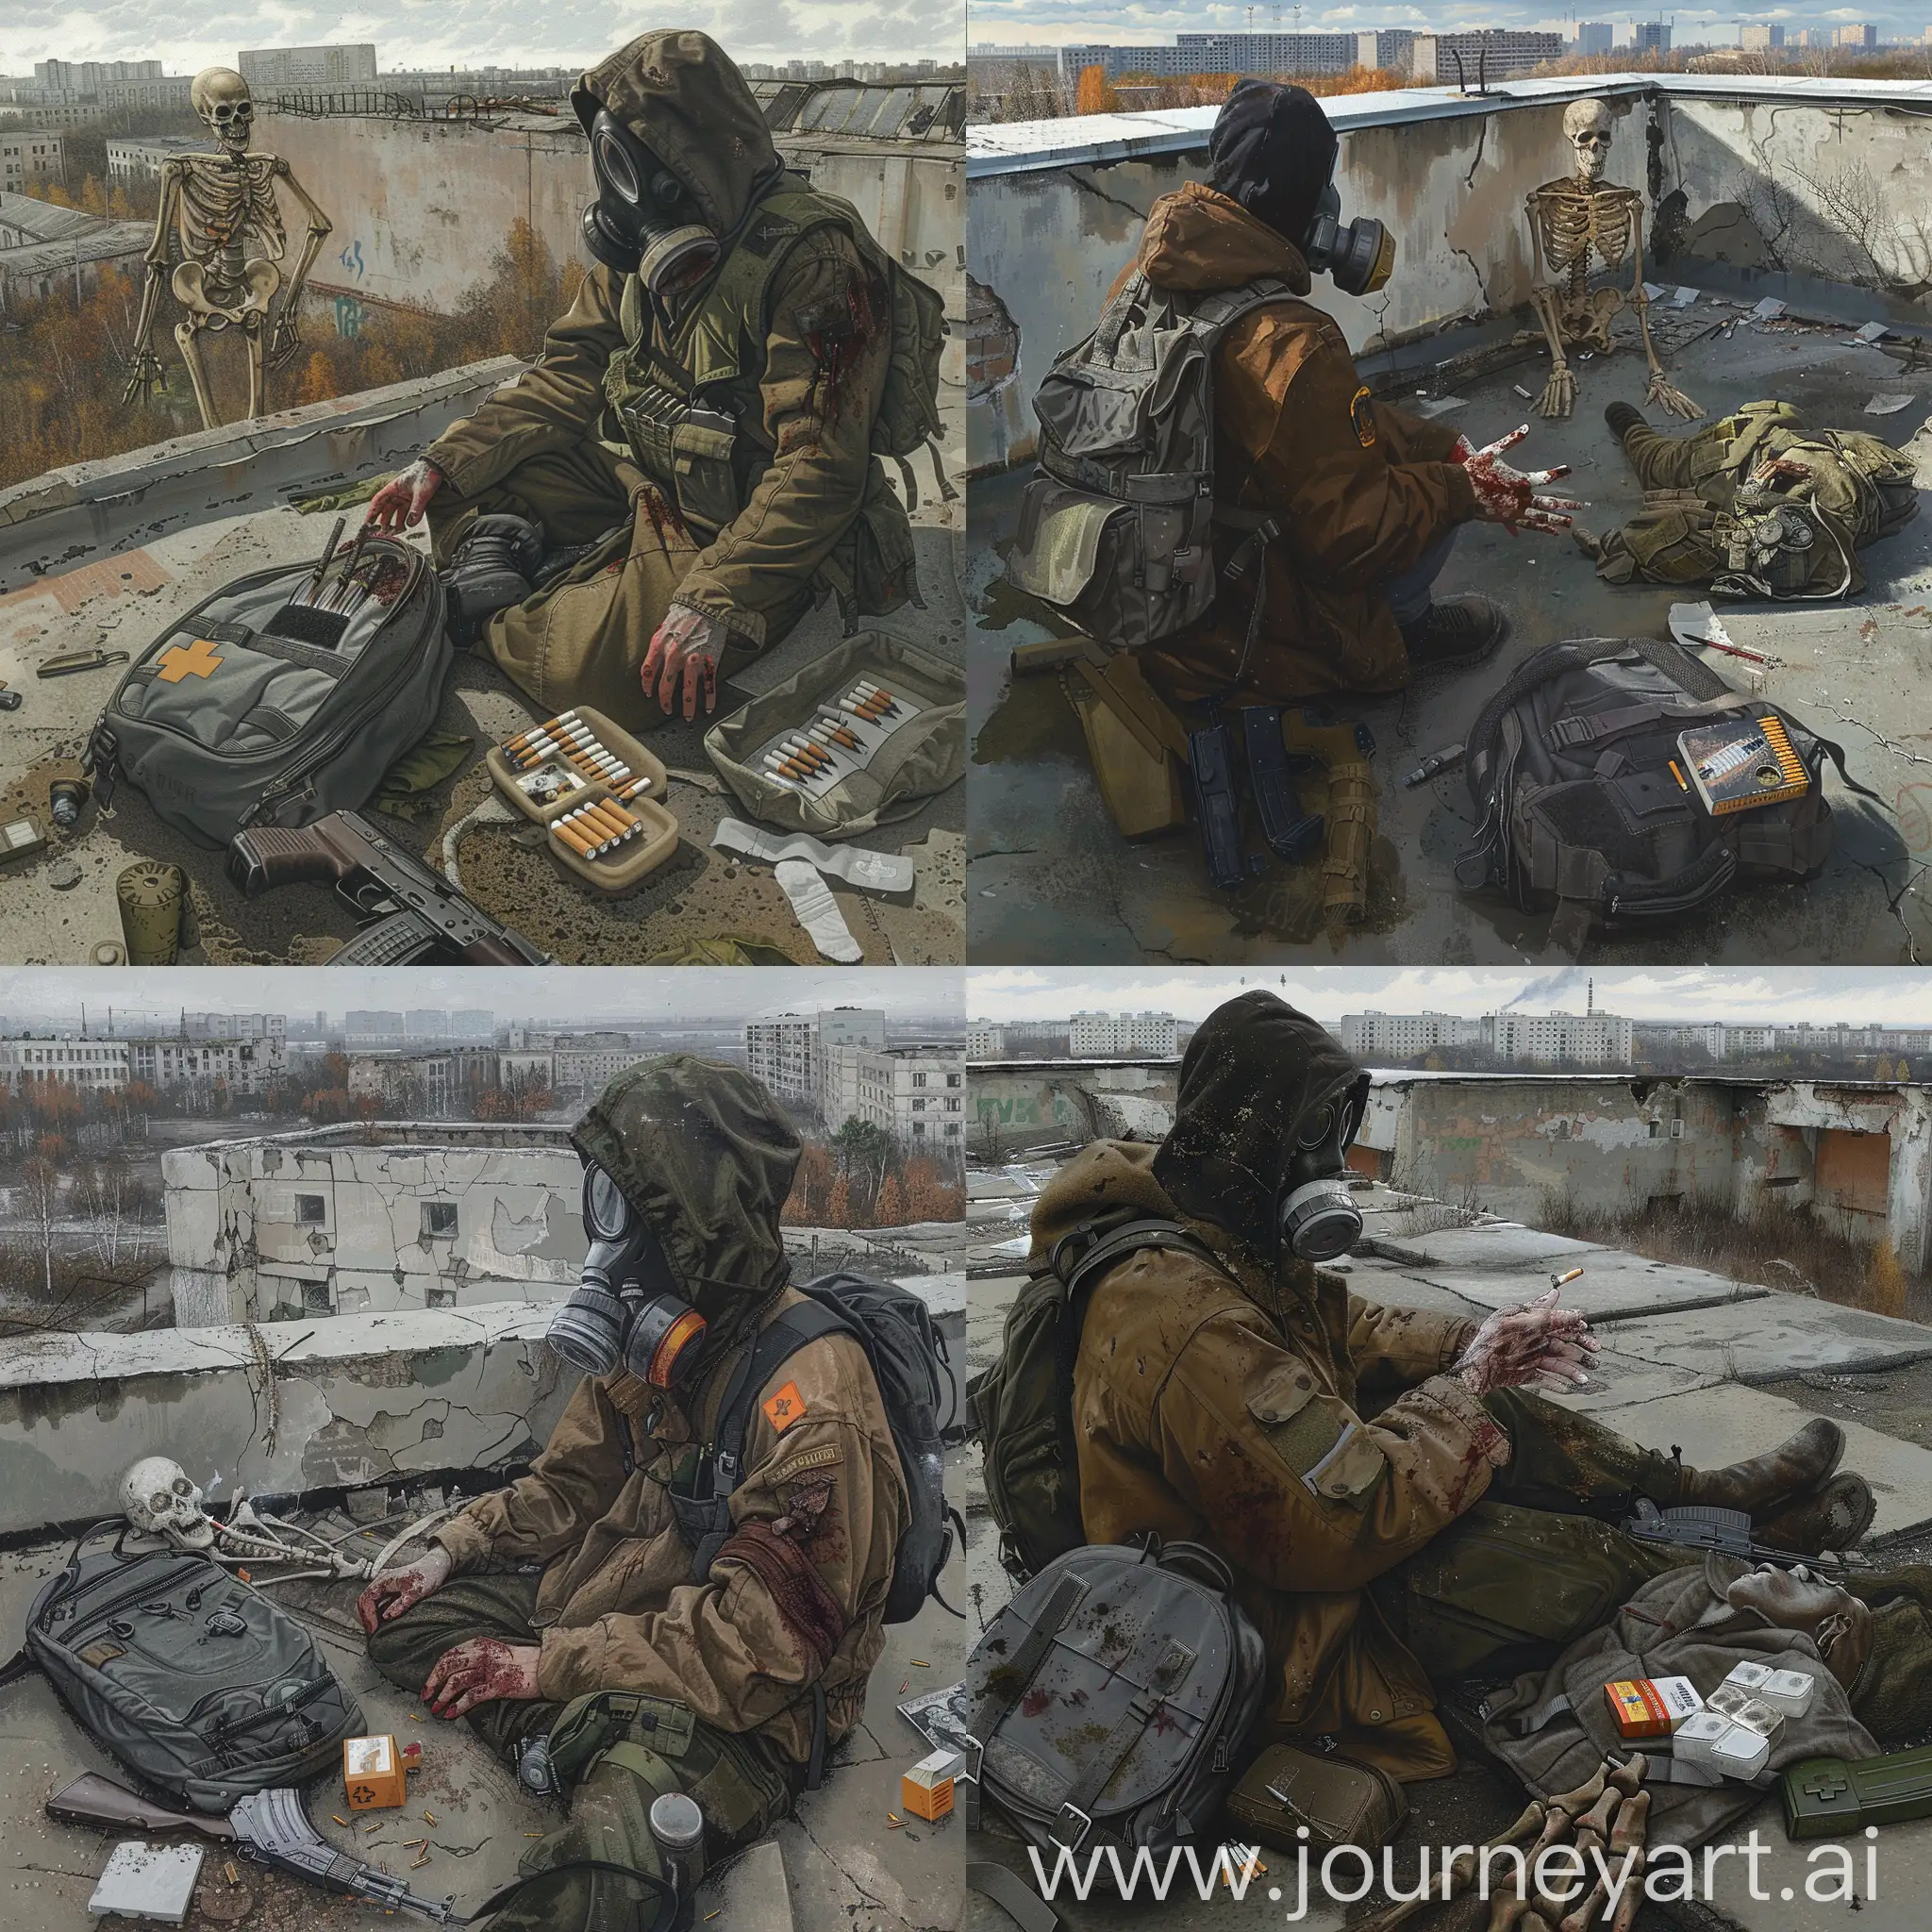 Stalker art, mystical art, the roof of an abandoned building in the abandoned city of Pripyat, a stalker in a gas mask, in a brown jacket, military unloading on top of the jacket, next to the stalker lies a gray backpack, an open and already used first aid kit, bandages, the stalker is almost covered in dirt, his hands are covered in blood and 2 fingers are missing on one hand, there is also an AK-47 lying nearby, a stalker looks at the corpse of a skeleton in military uniform, the corpse of a skeleton has a cigarette in its mouth, the skeleton passes a pack of cigarettes to the stalker, the abandoned Soviet city of Pripyat is visible from the roof, mystical art.